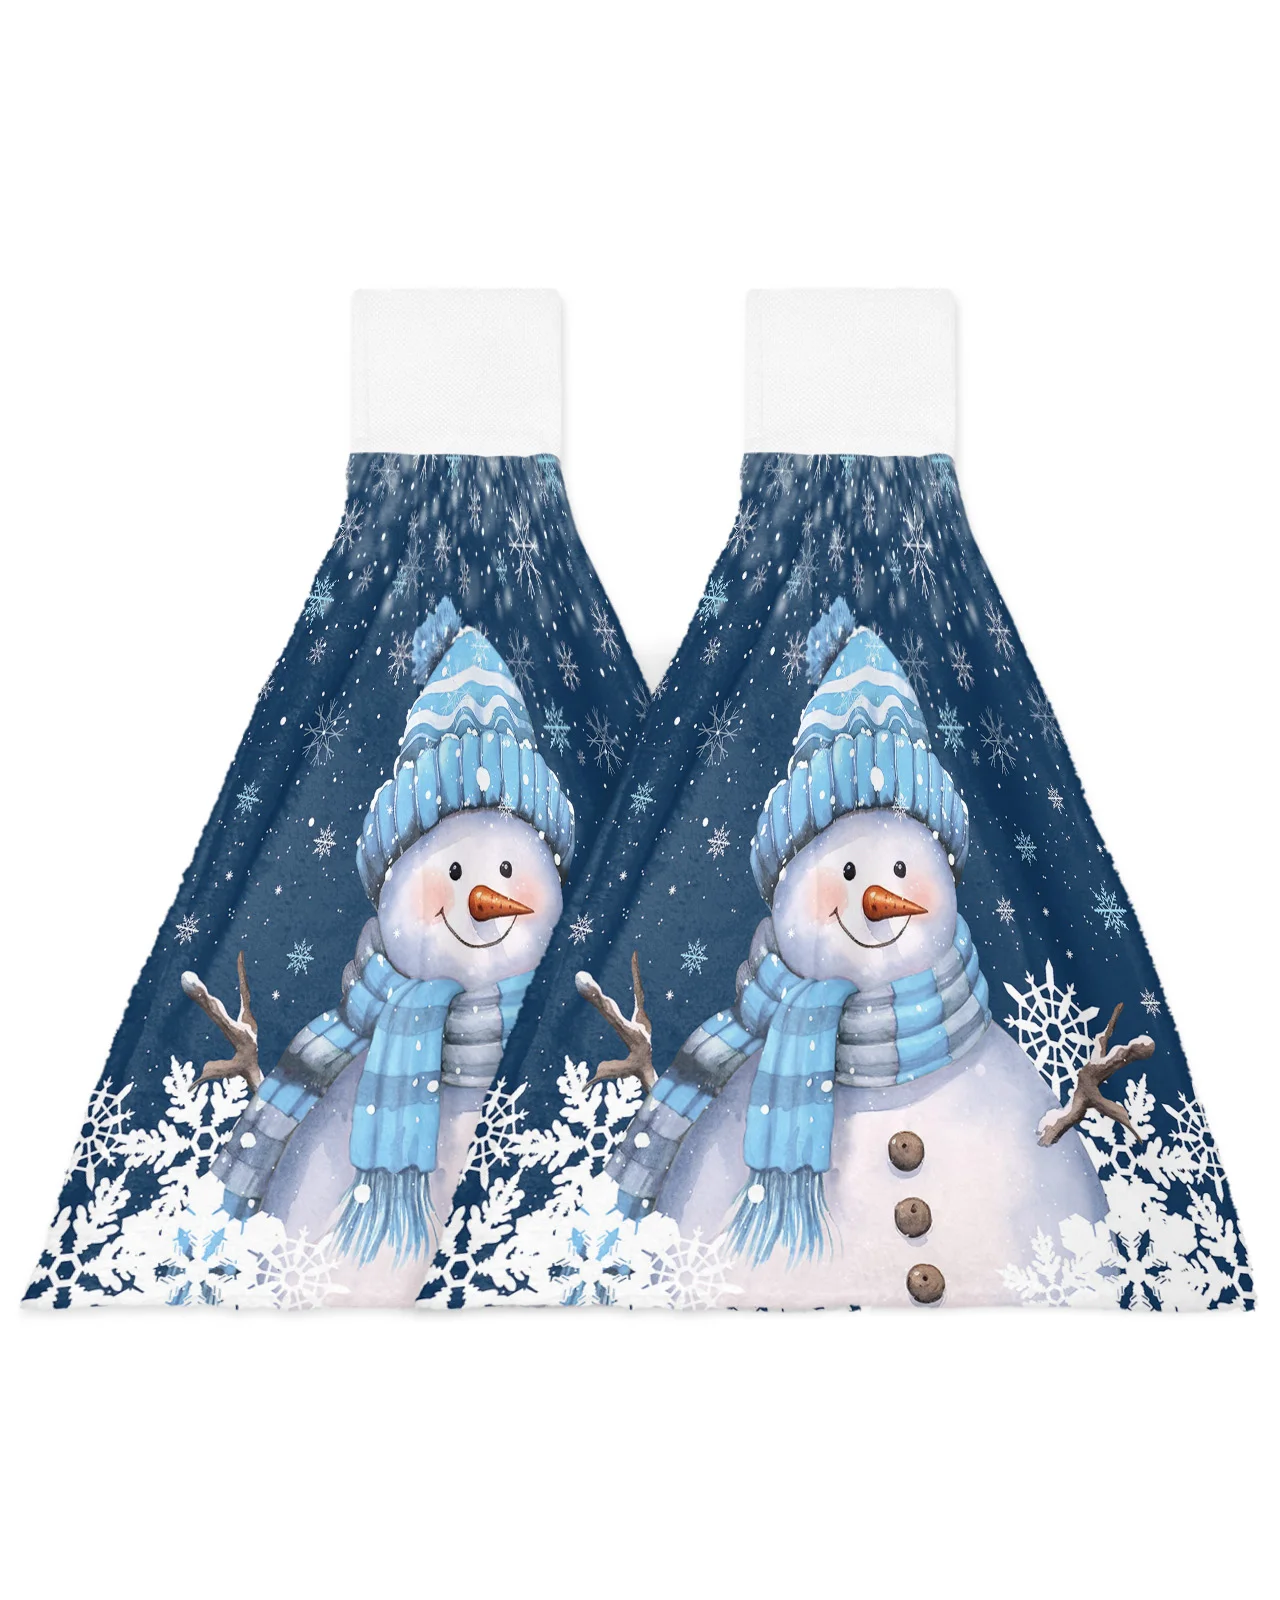 https://ae01.alicdn.com/kf/Sc944db5a0de4465e9b4c9e822cce5b8aN/Christmas-Winter-Snowflakes-Dark-Blue-Hanging-Kitchen-Hands-Towels-Quick-Dry-Microfiber-Cleaning-Cloth-Soft-Towel.jpg